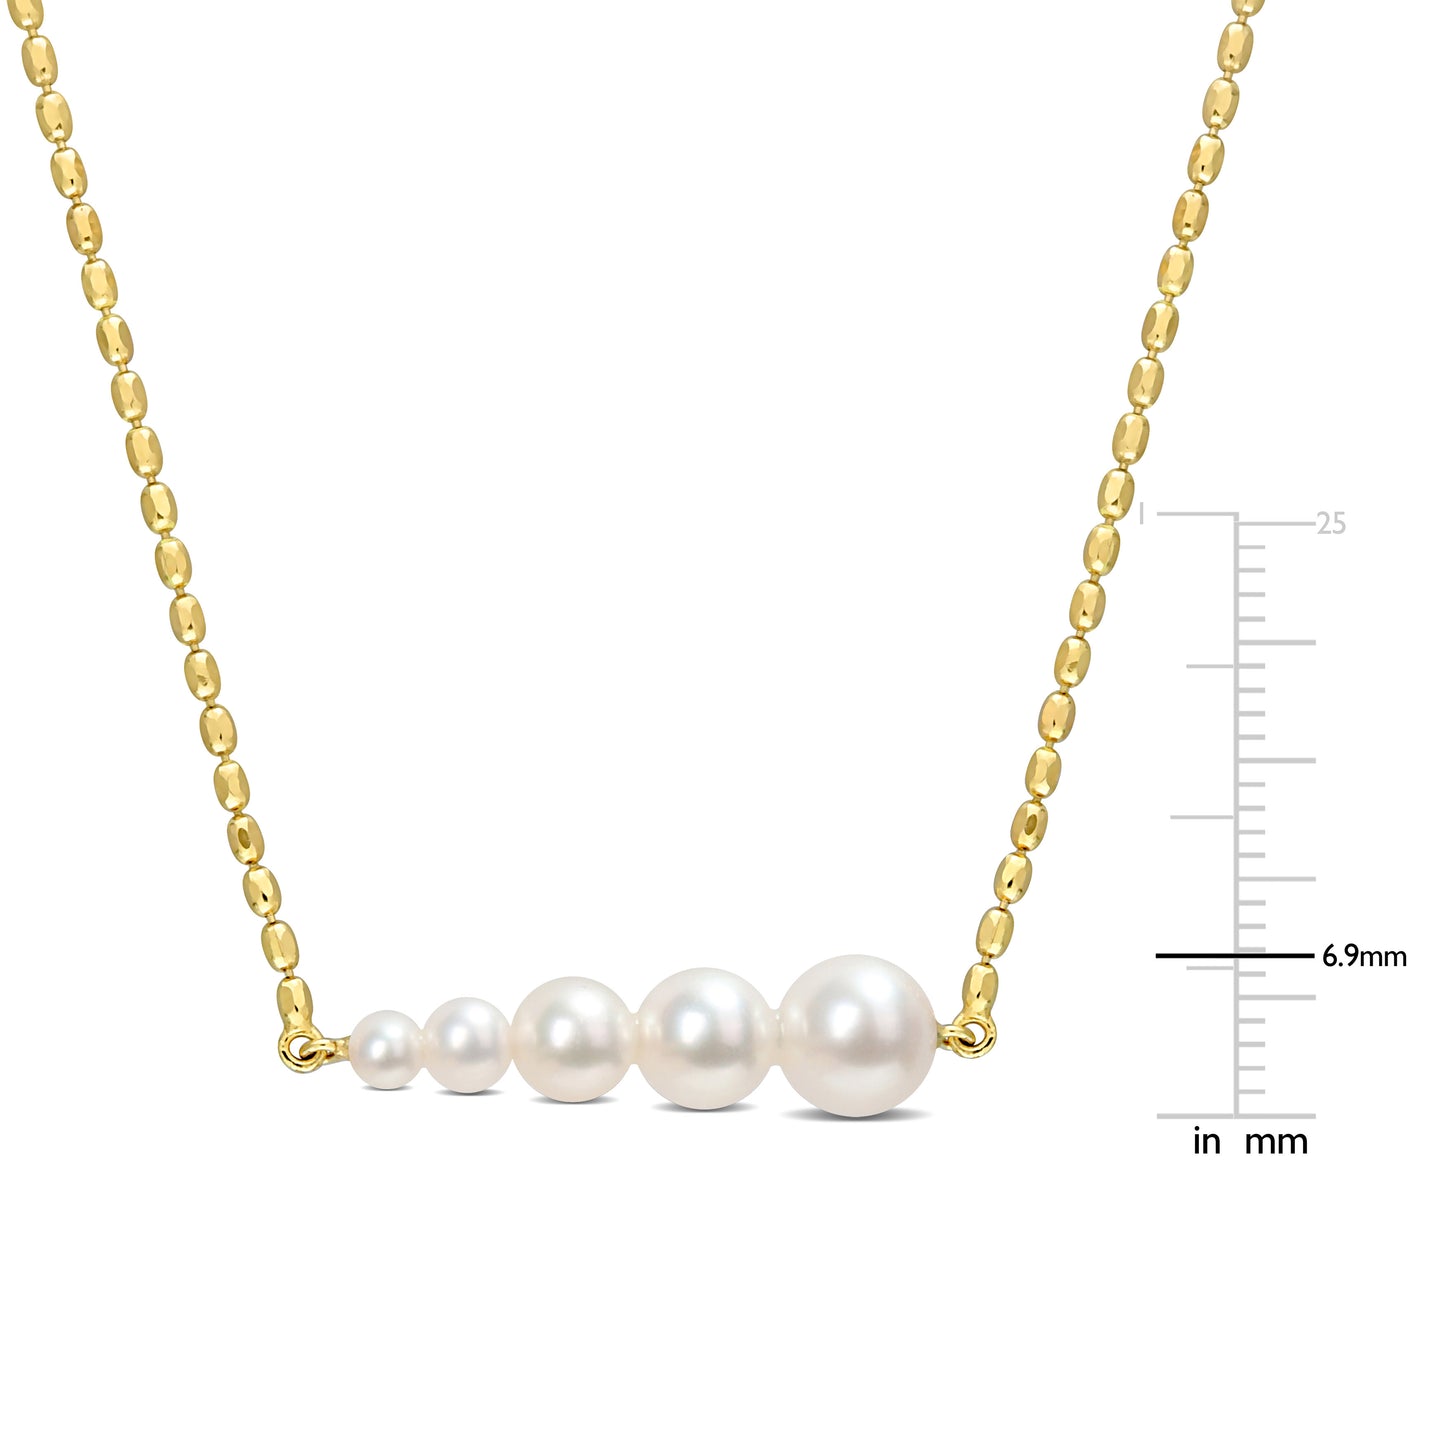 White Freshwater Cultured Pearl Necklace in 18k Yellow Gold Plated